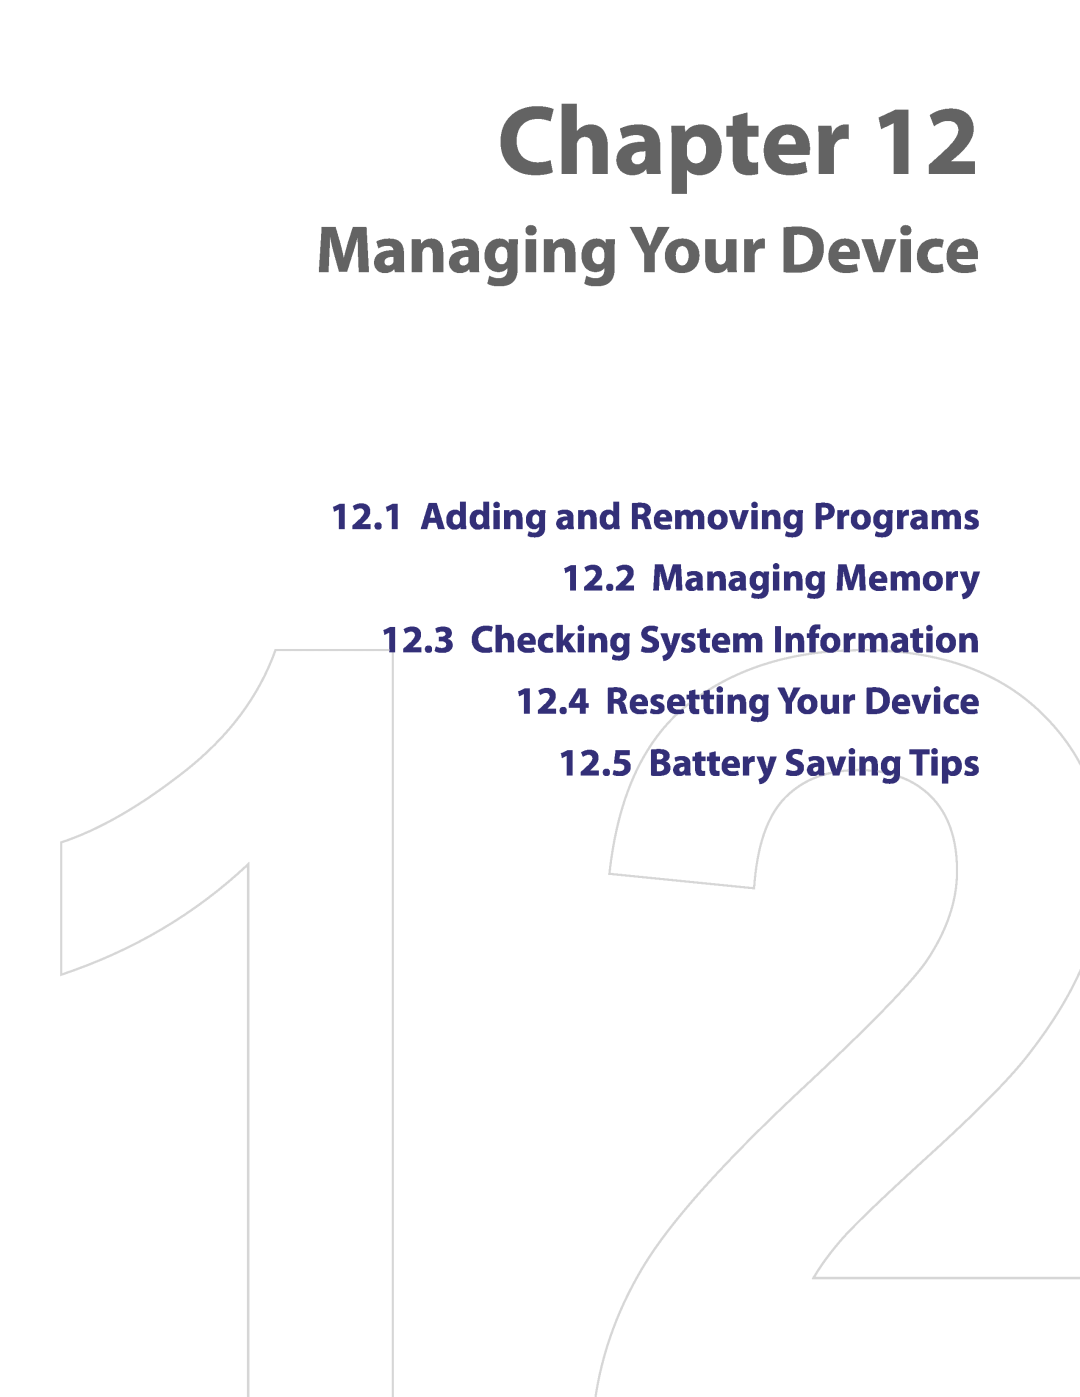 HTC PDA Phone Managing Your Device, Adding and Removing Programs 12.2 Managing Memory, Battery Saving Tips, Chapter 